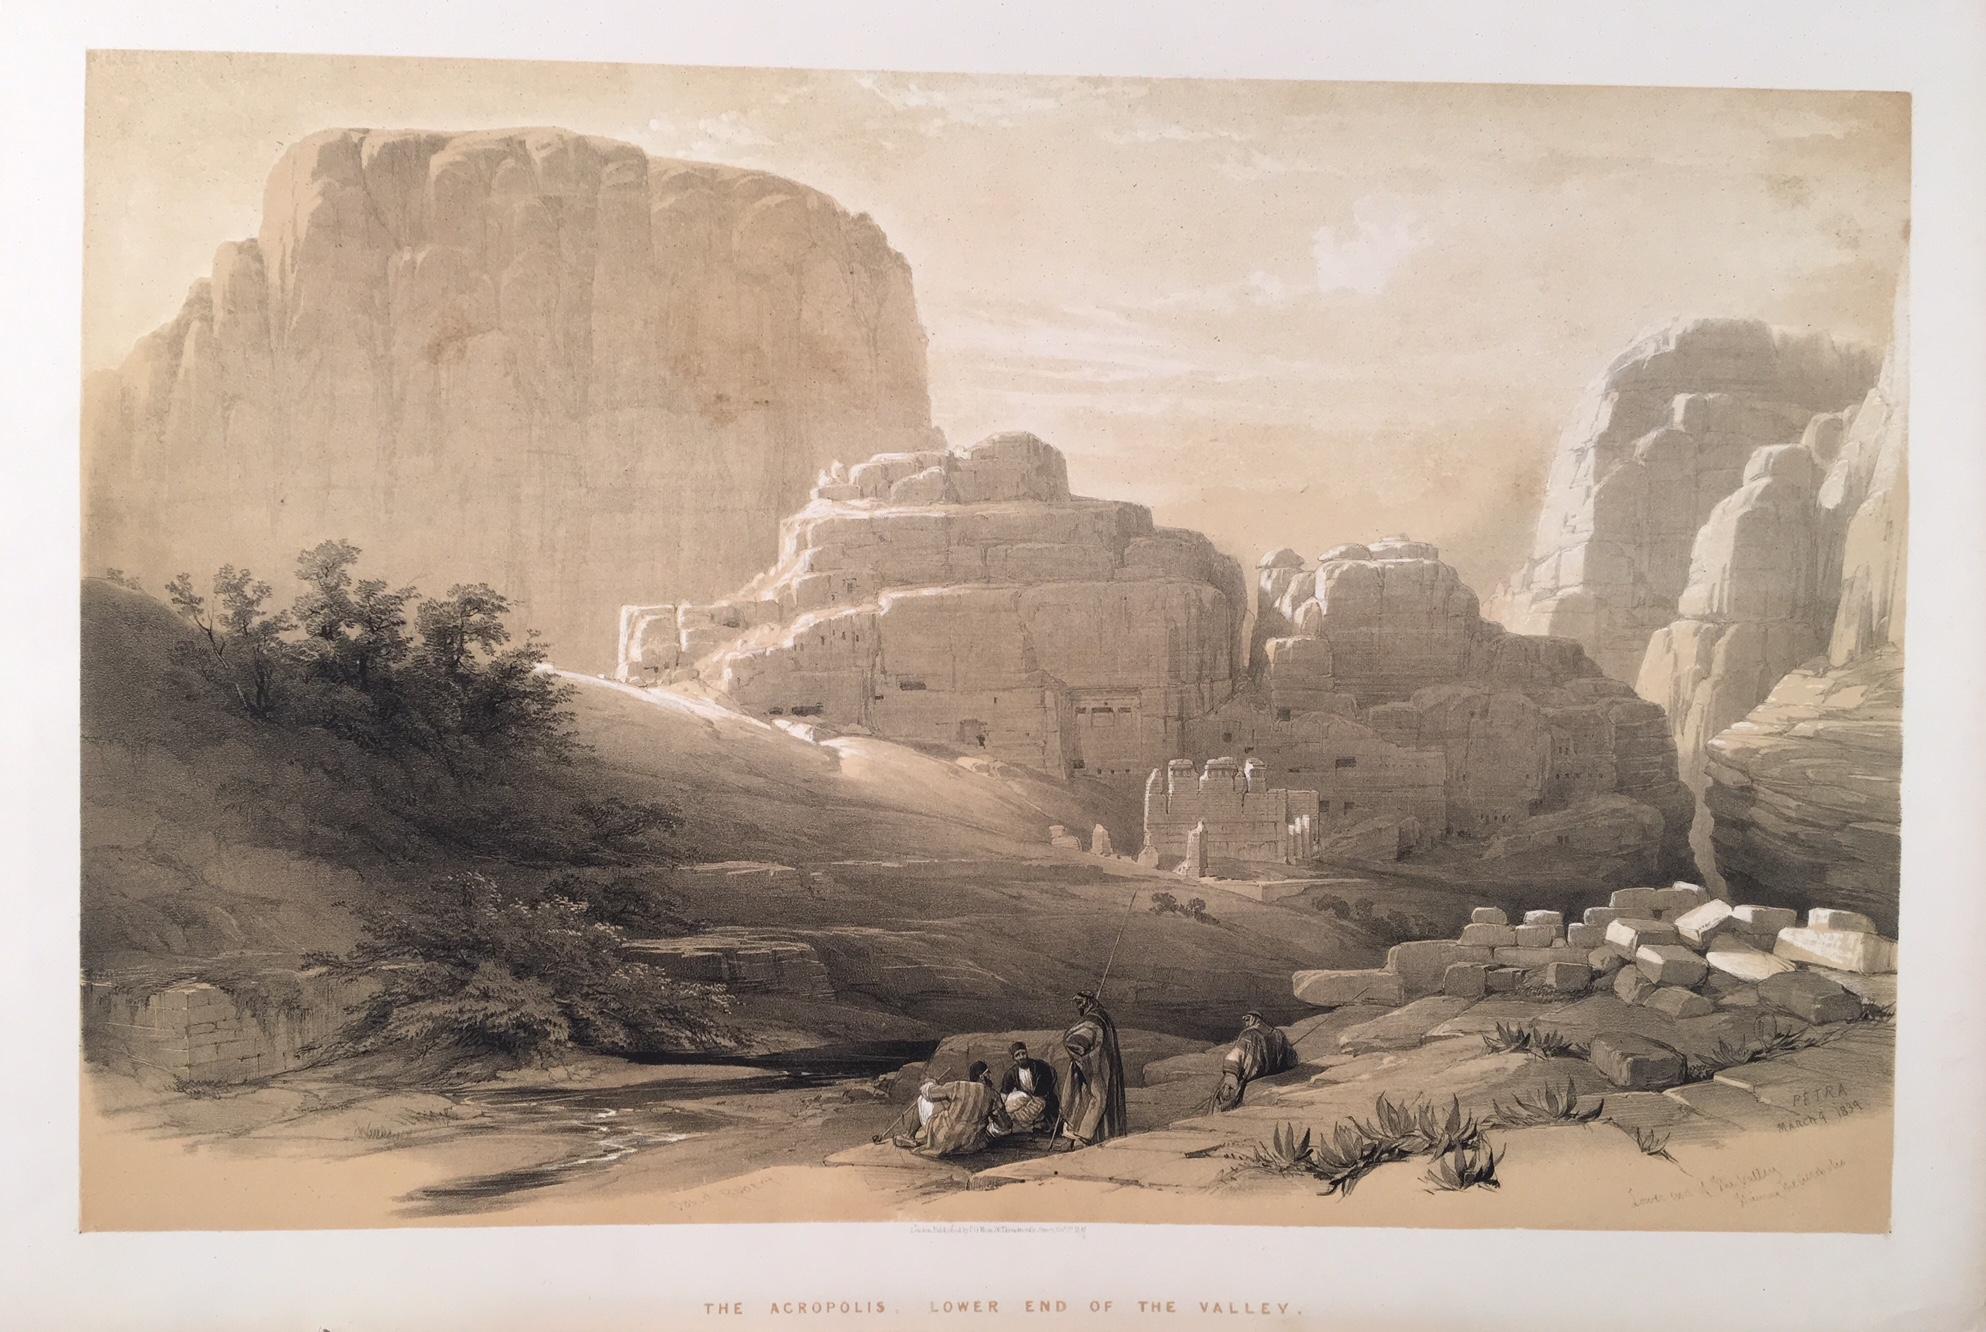 The Acropolis, Lower End of the Valley  (of Petra) - Beige Landscape Print by David Roberts